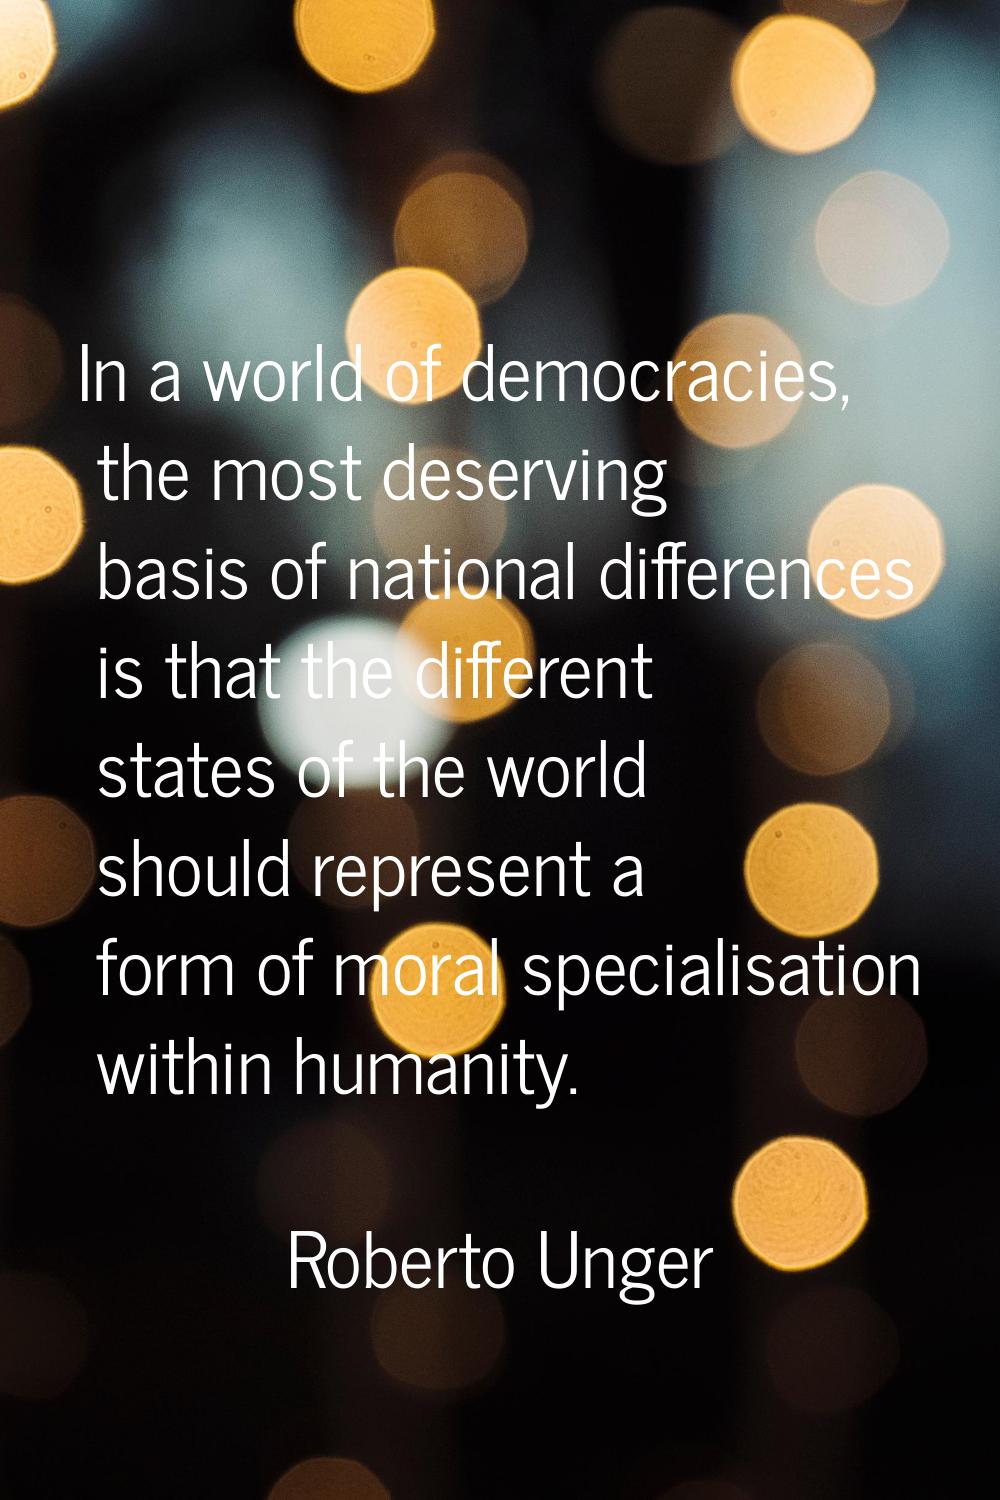 In a world of democracies, the most deserving basis of national differences is that the different s